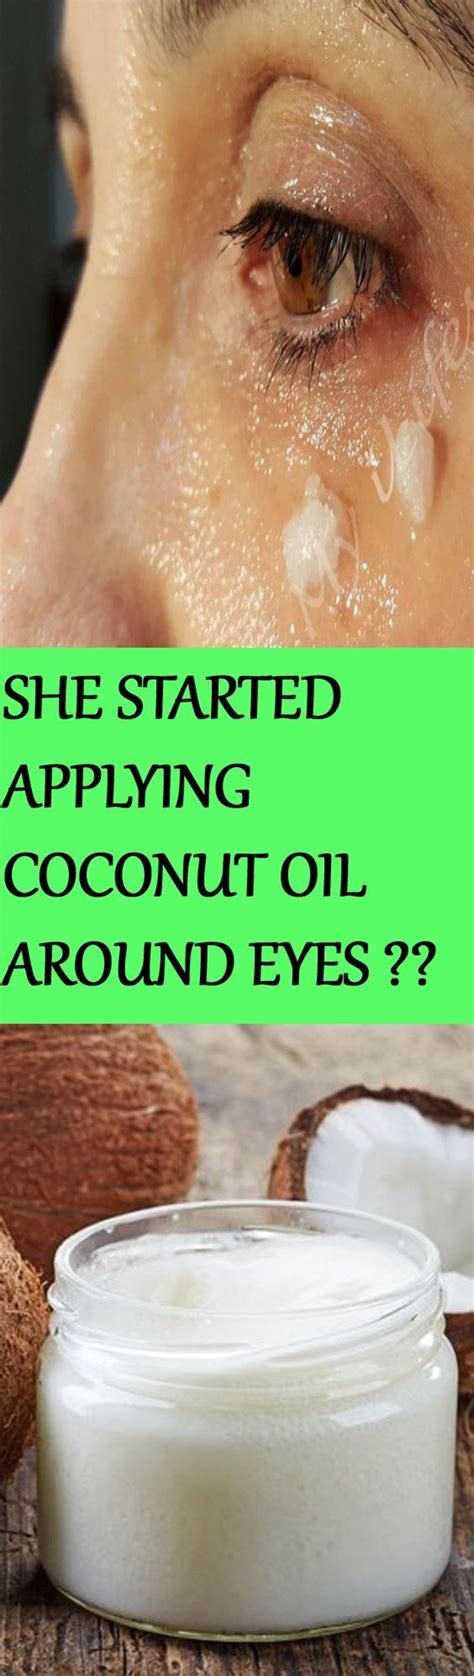 She Started Applying Coconut Oil Around Her Eyes Minutes Later